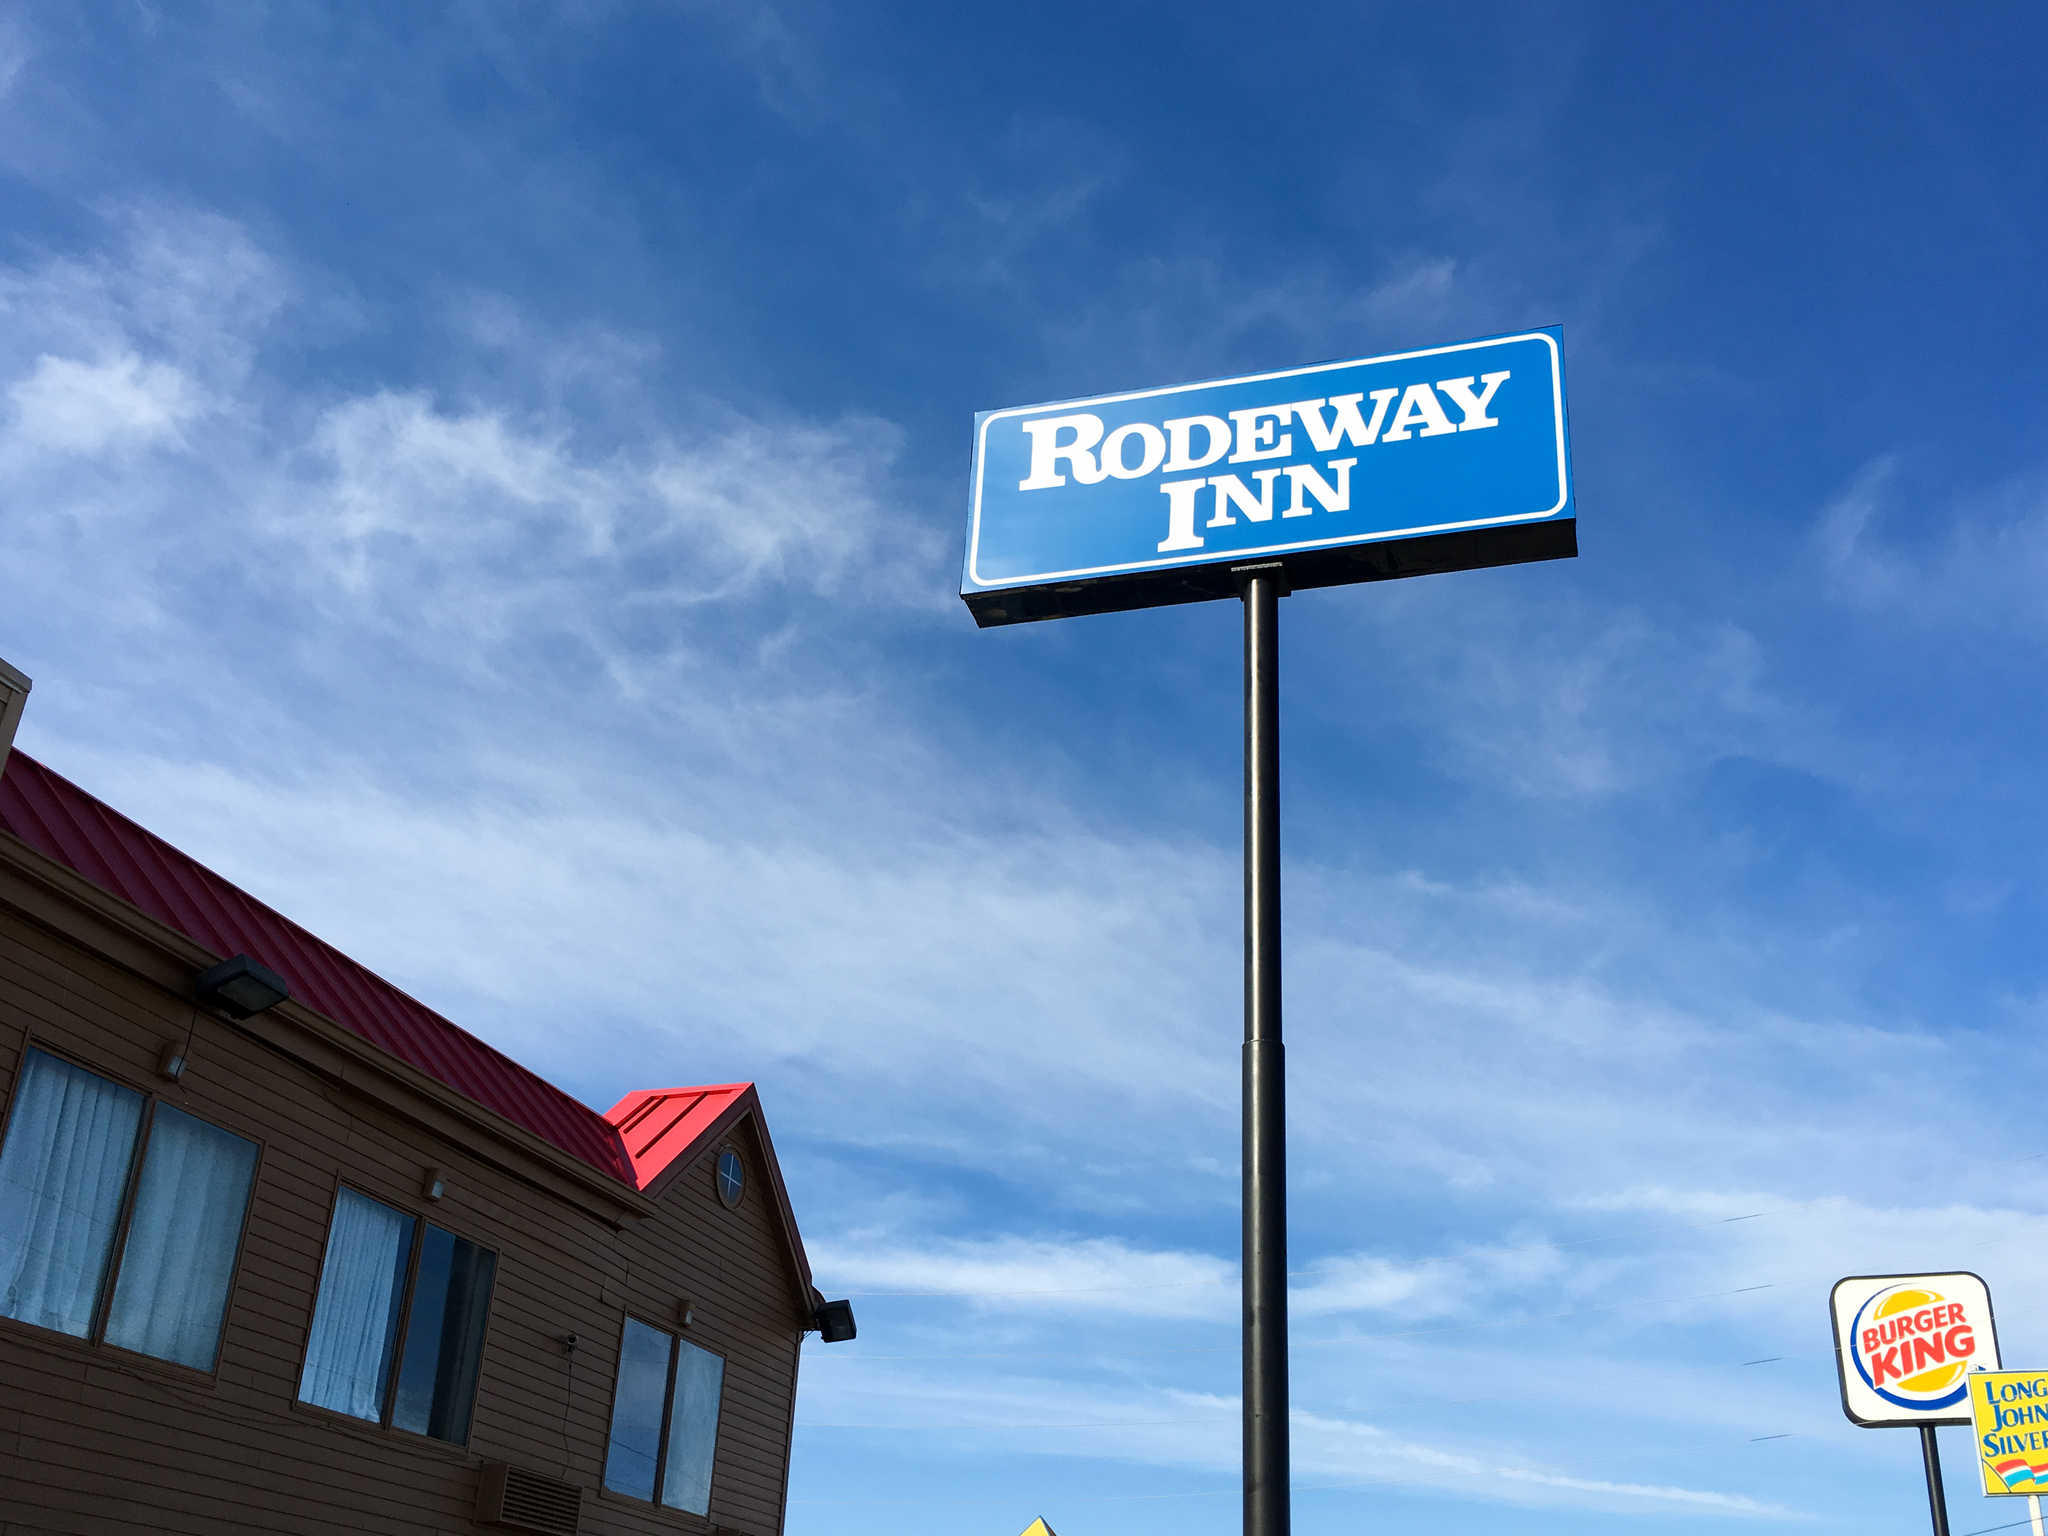 Rodeway Inn Coupons near me in Thomson 8coupons